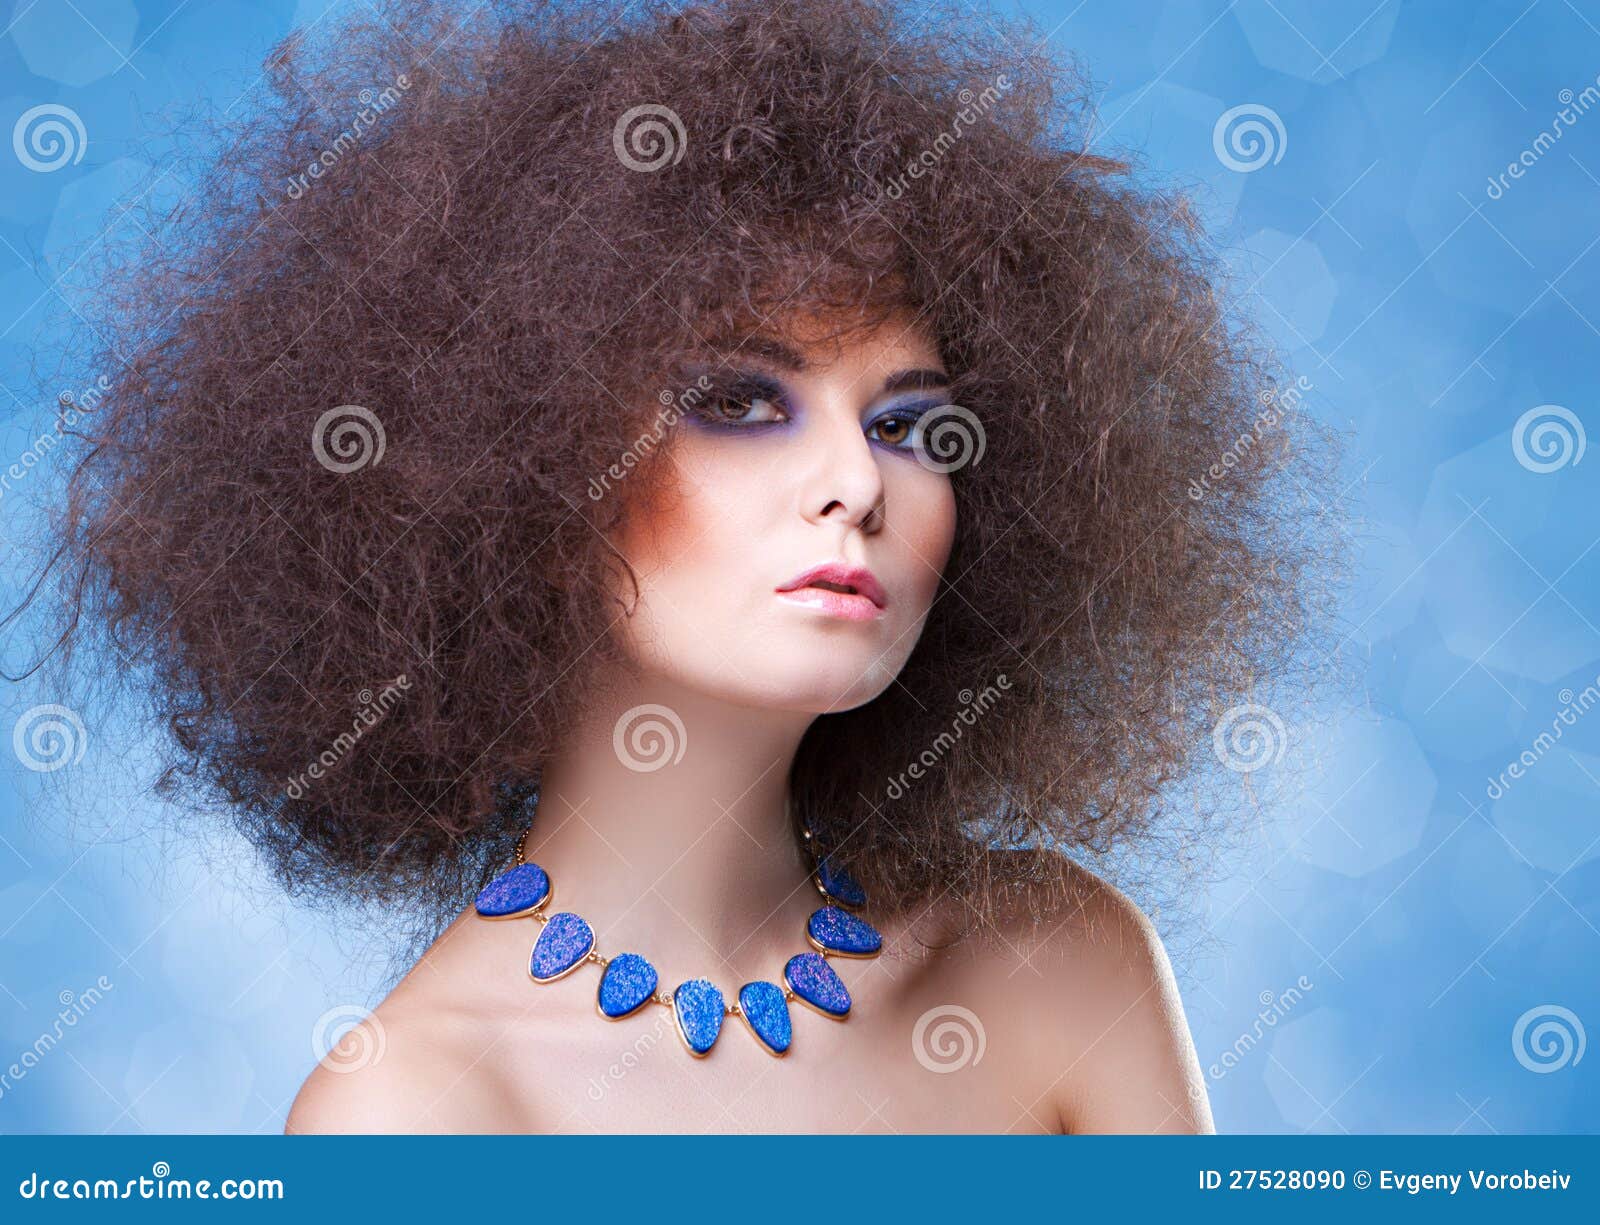 Blue Grey Curly Hair: The Perfect Color for Any Season - wide 10